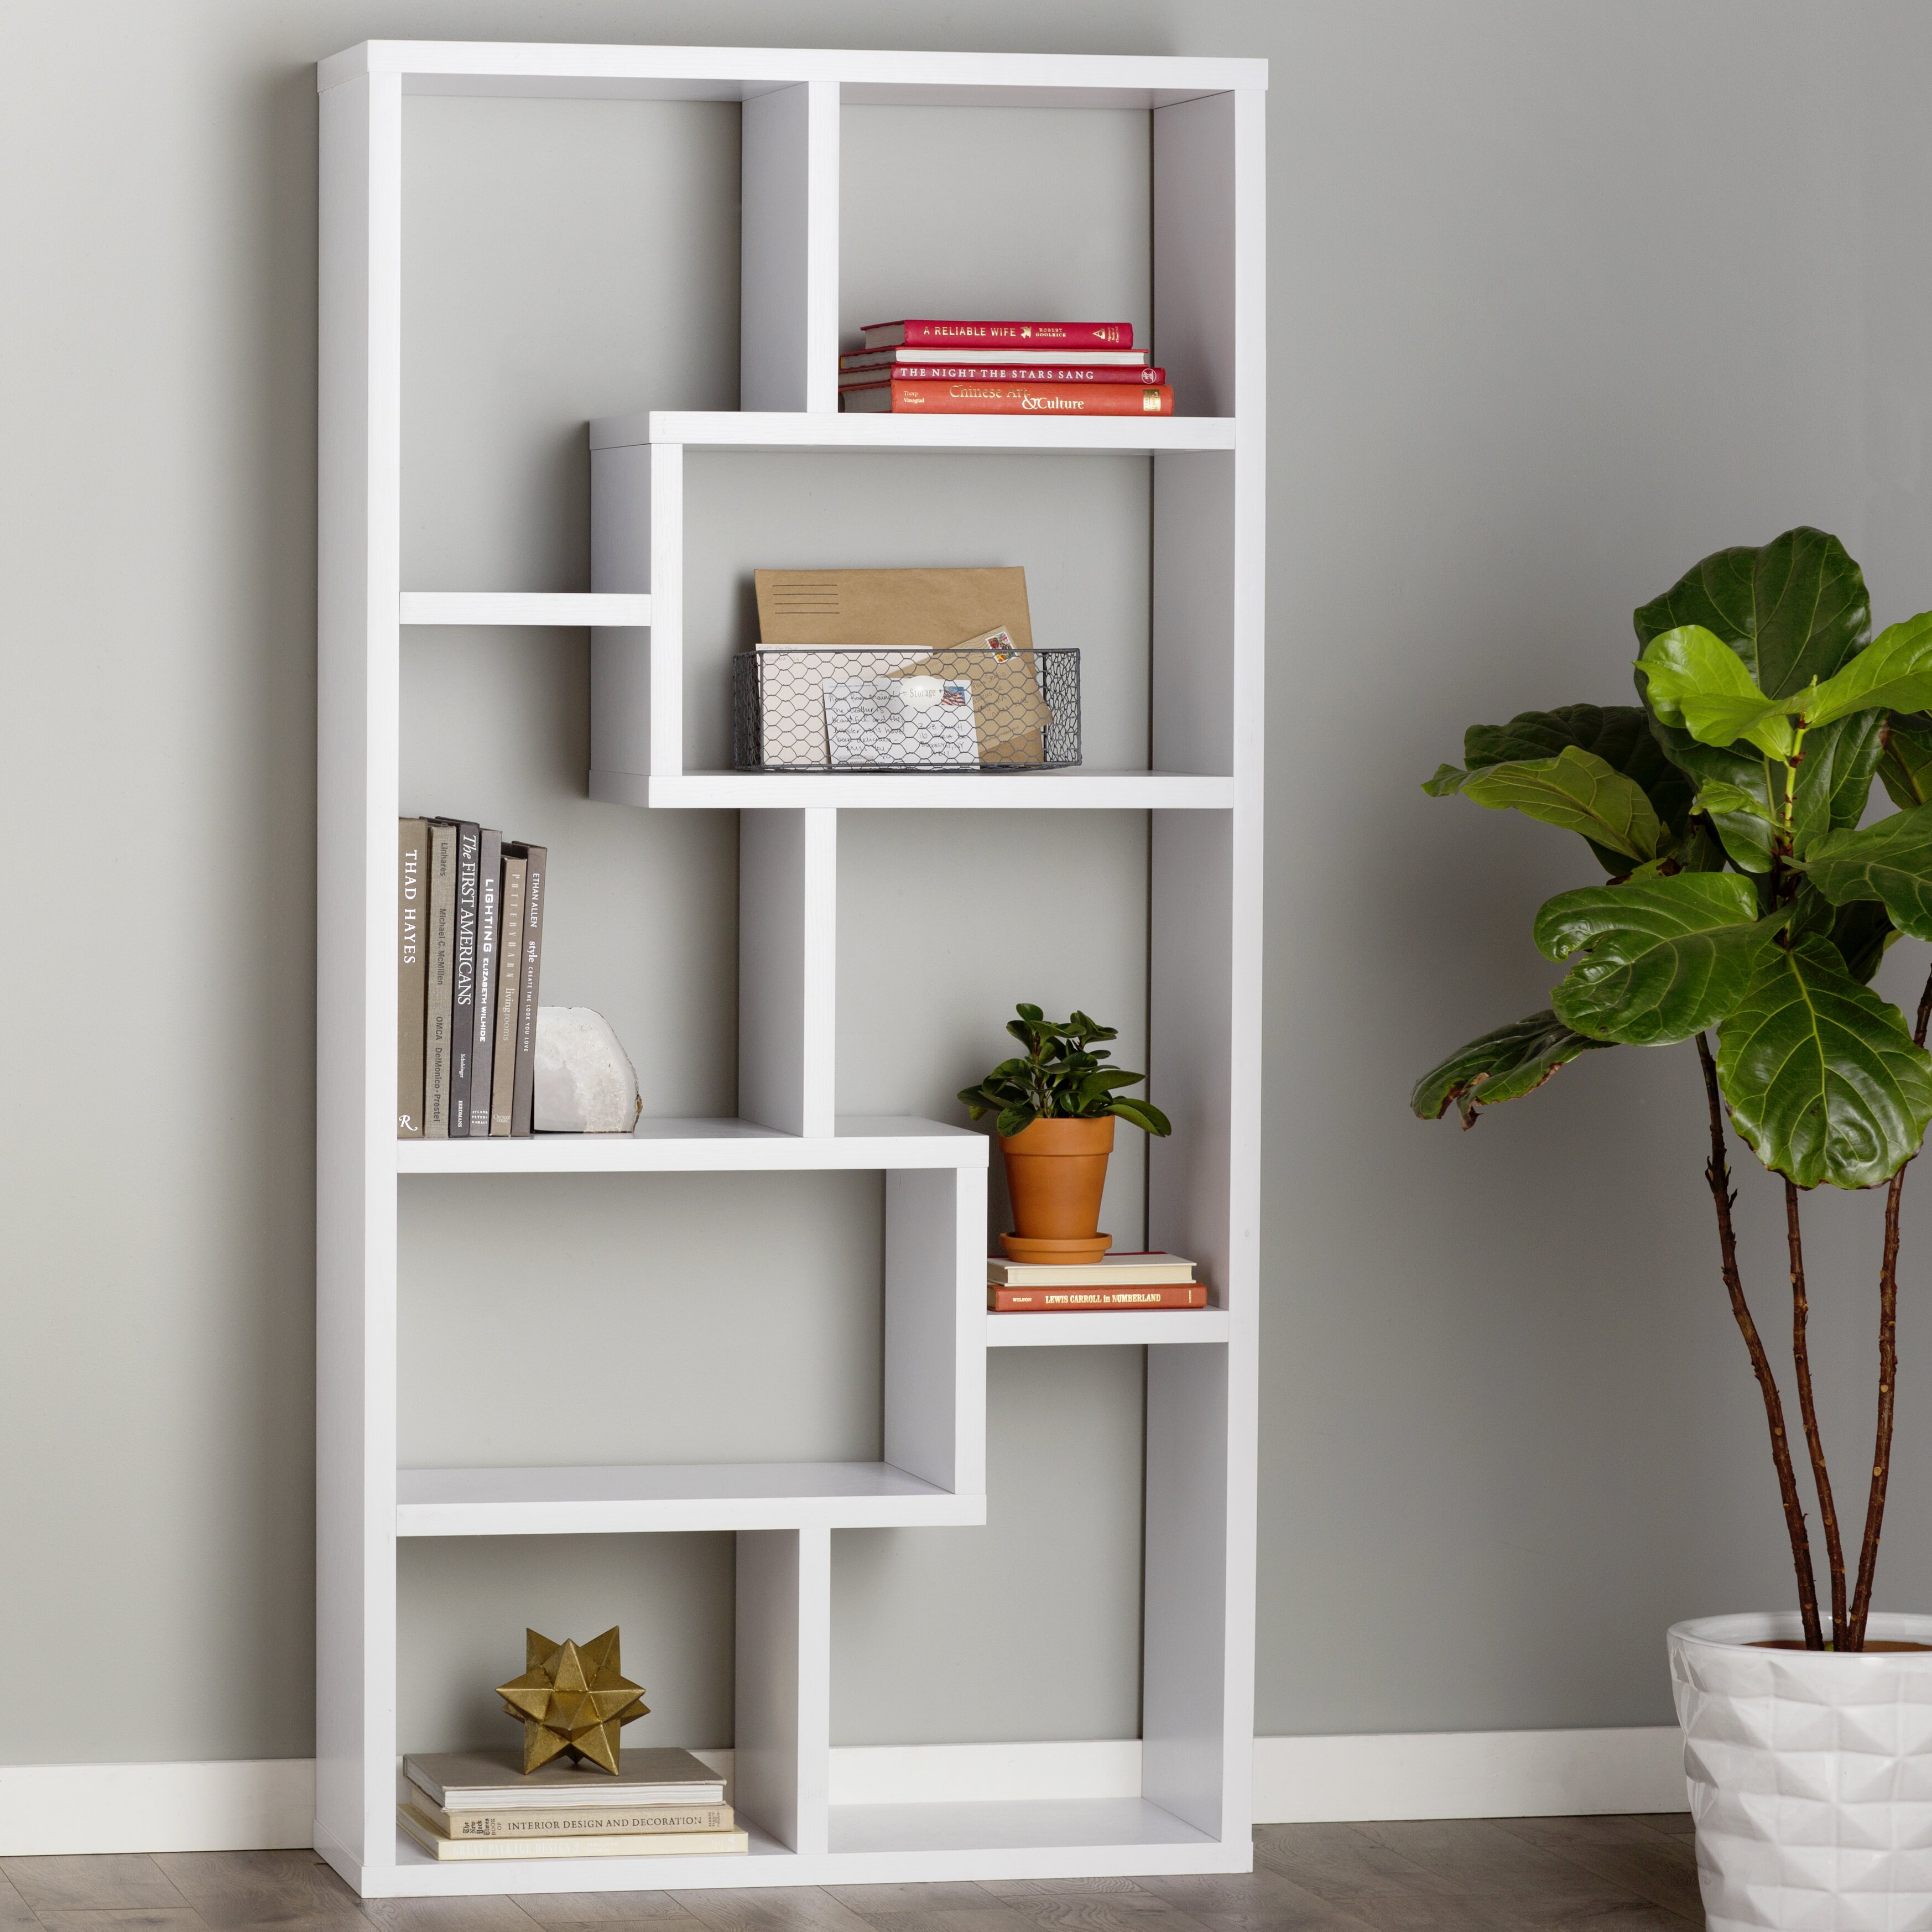 Shelves Decor: Homely Accent With A Personal Touch